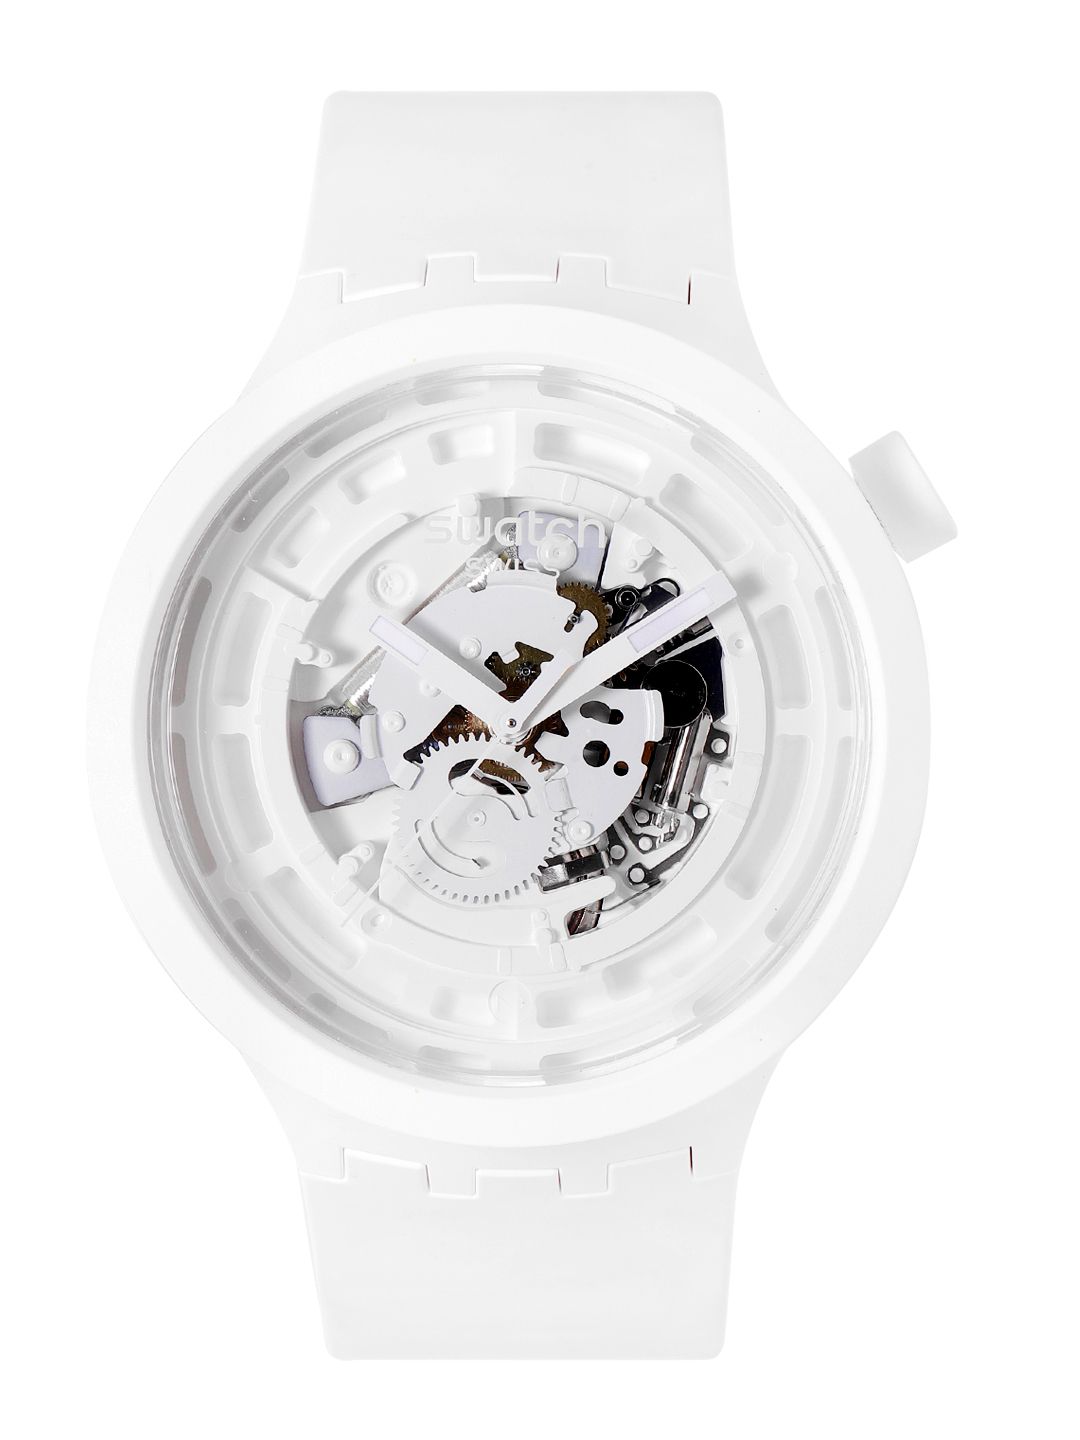 Swatch Unisex White Boost Swiss Made Skeleton Dial Water Resistant Analogue Watch SB03W100 Price in India